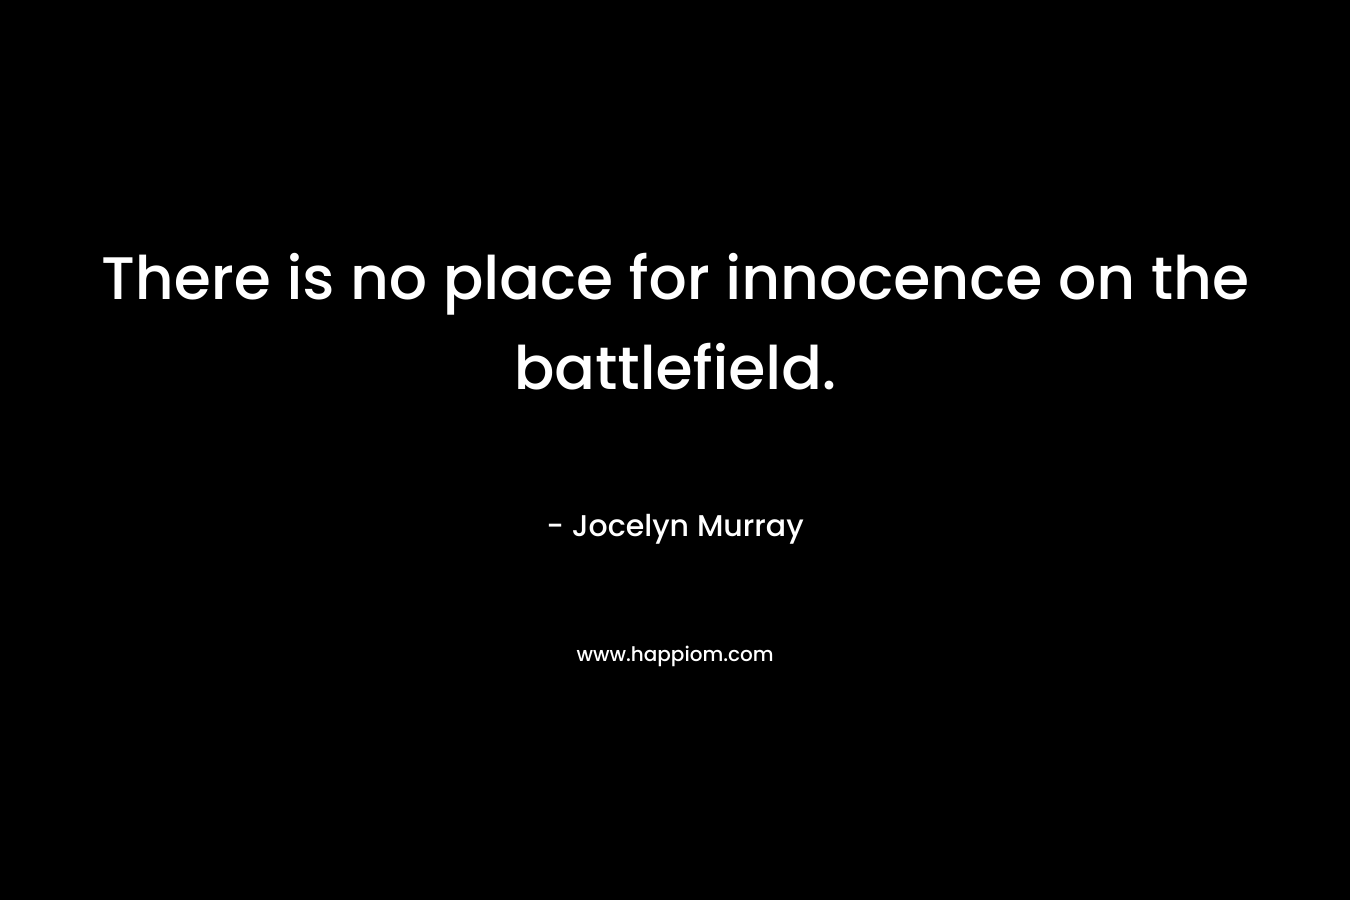 There is no place for innocence on the battlefield.